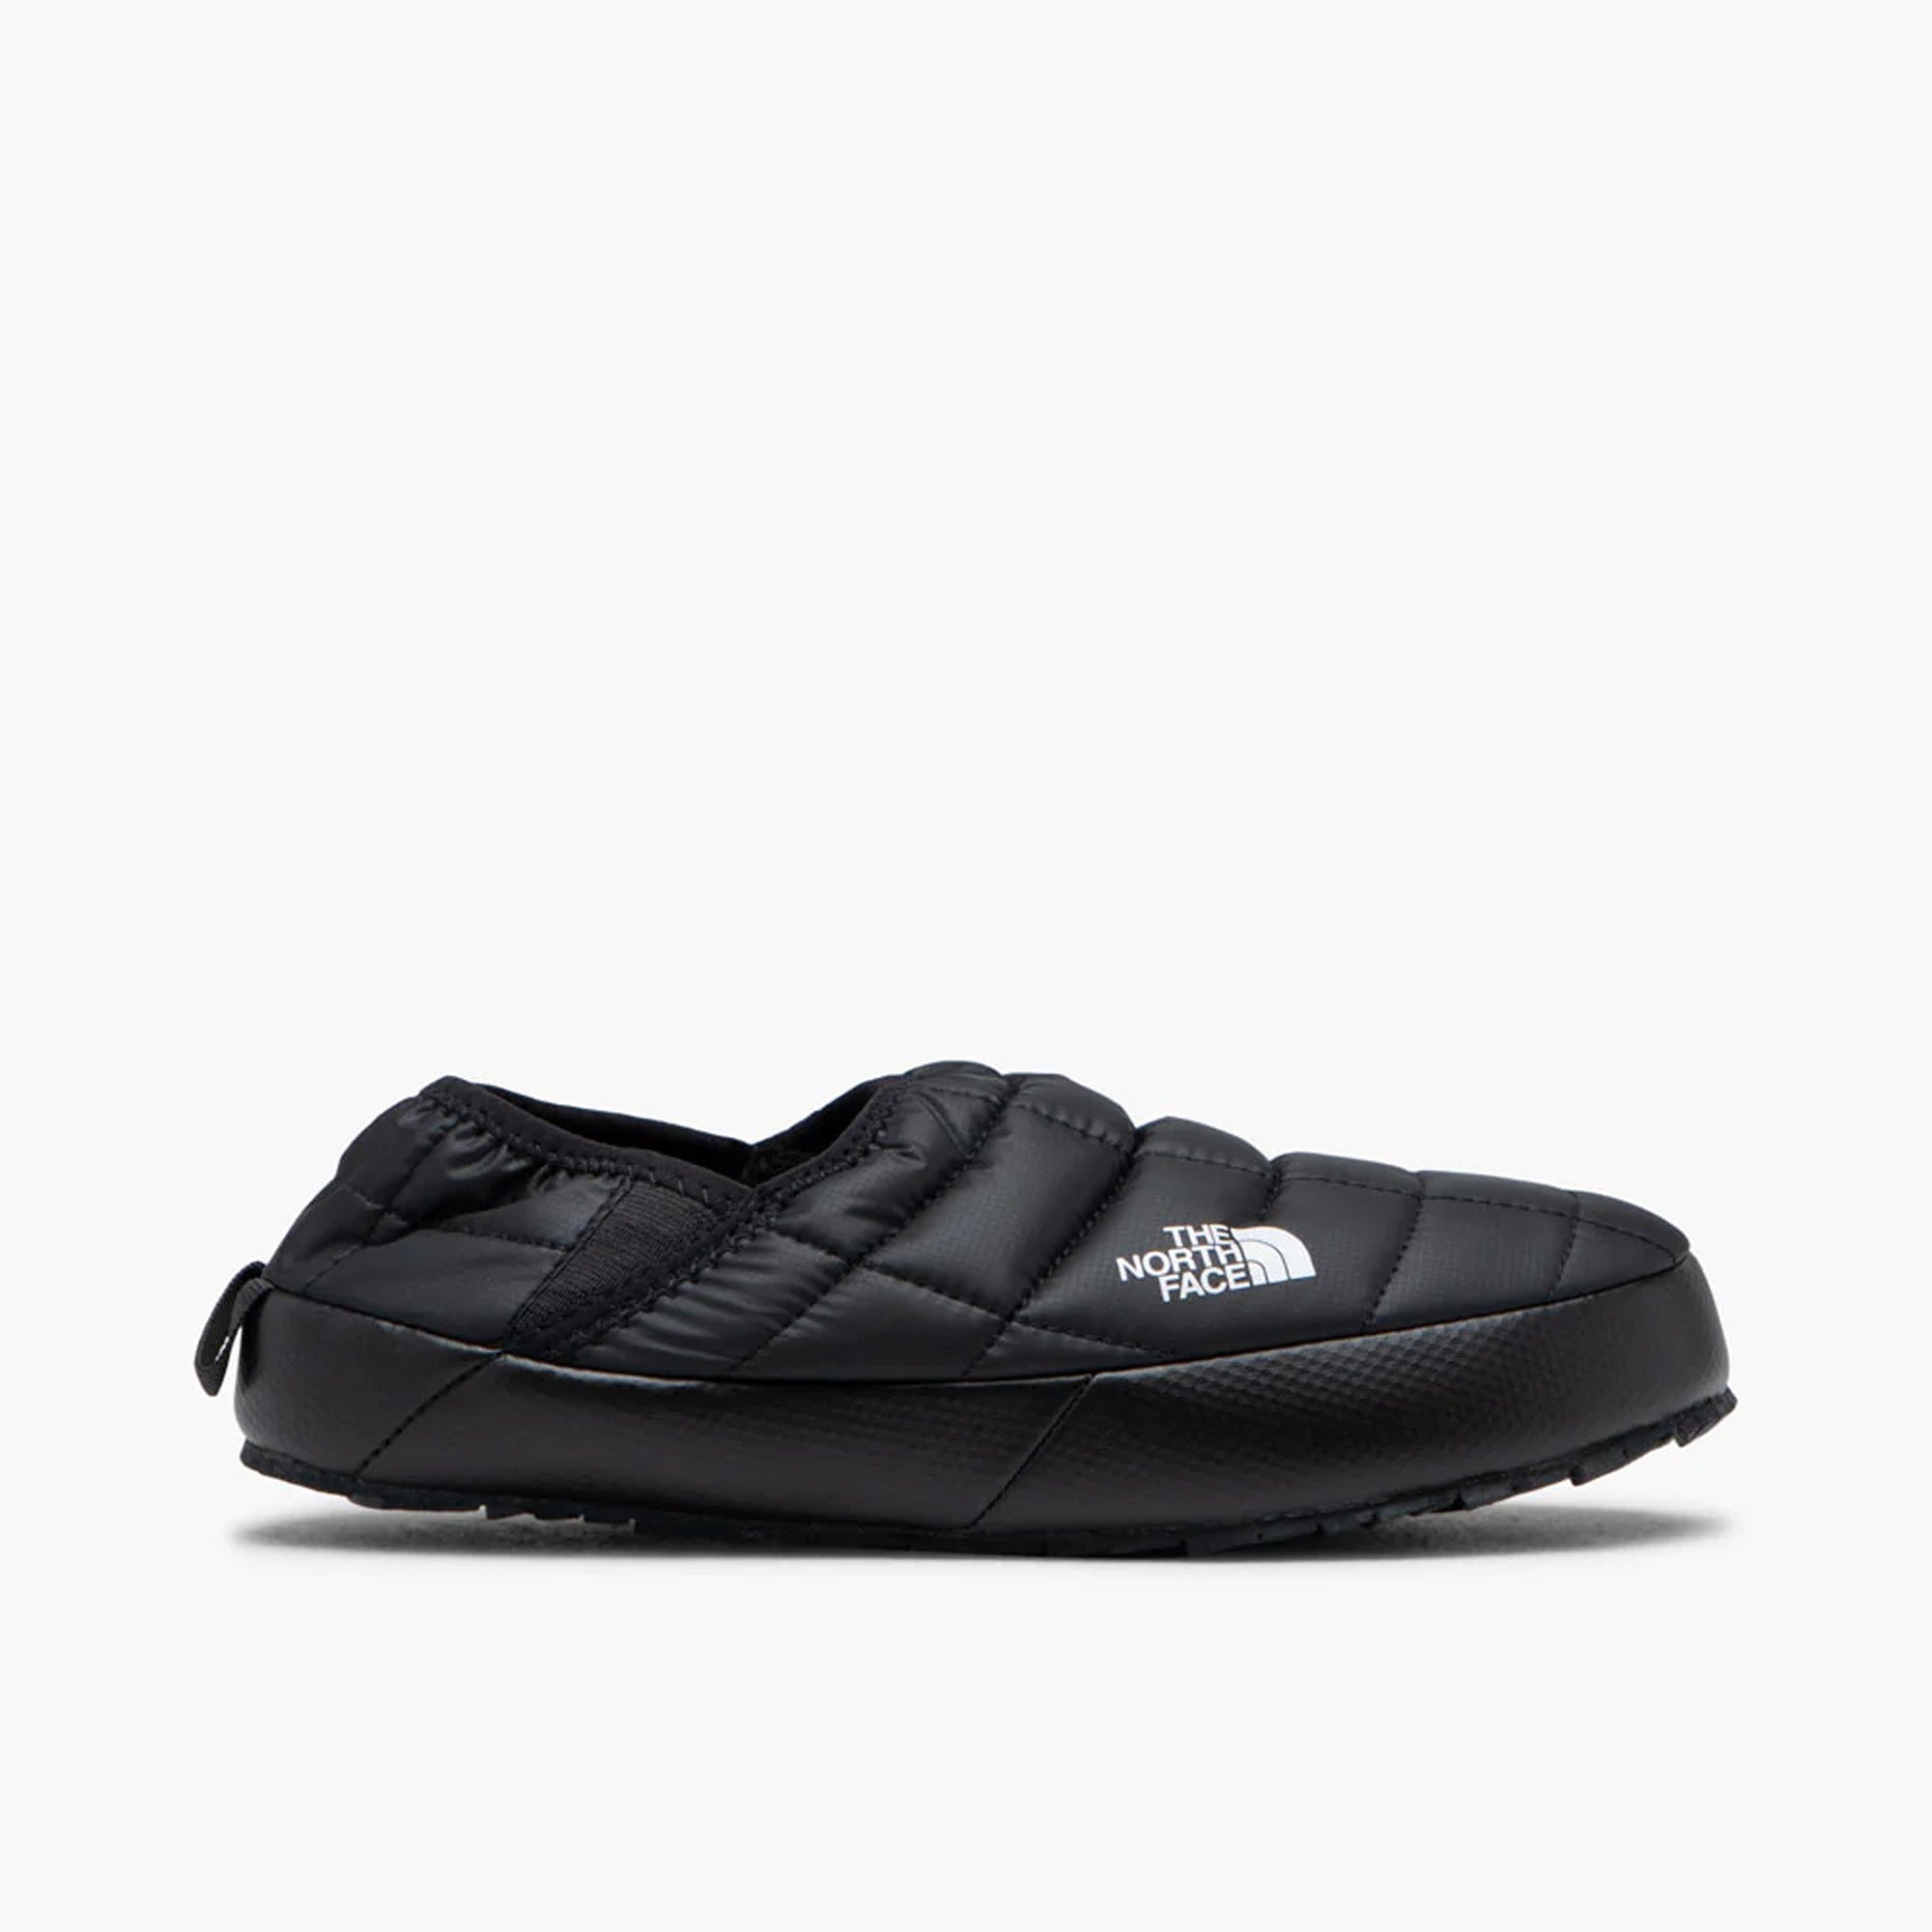 The North Face Thermoball Traction Mule V TNF pour Femmes Noir / TNF Noir   1